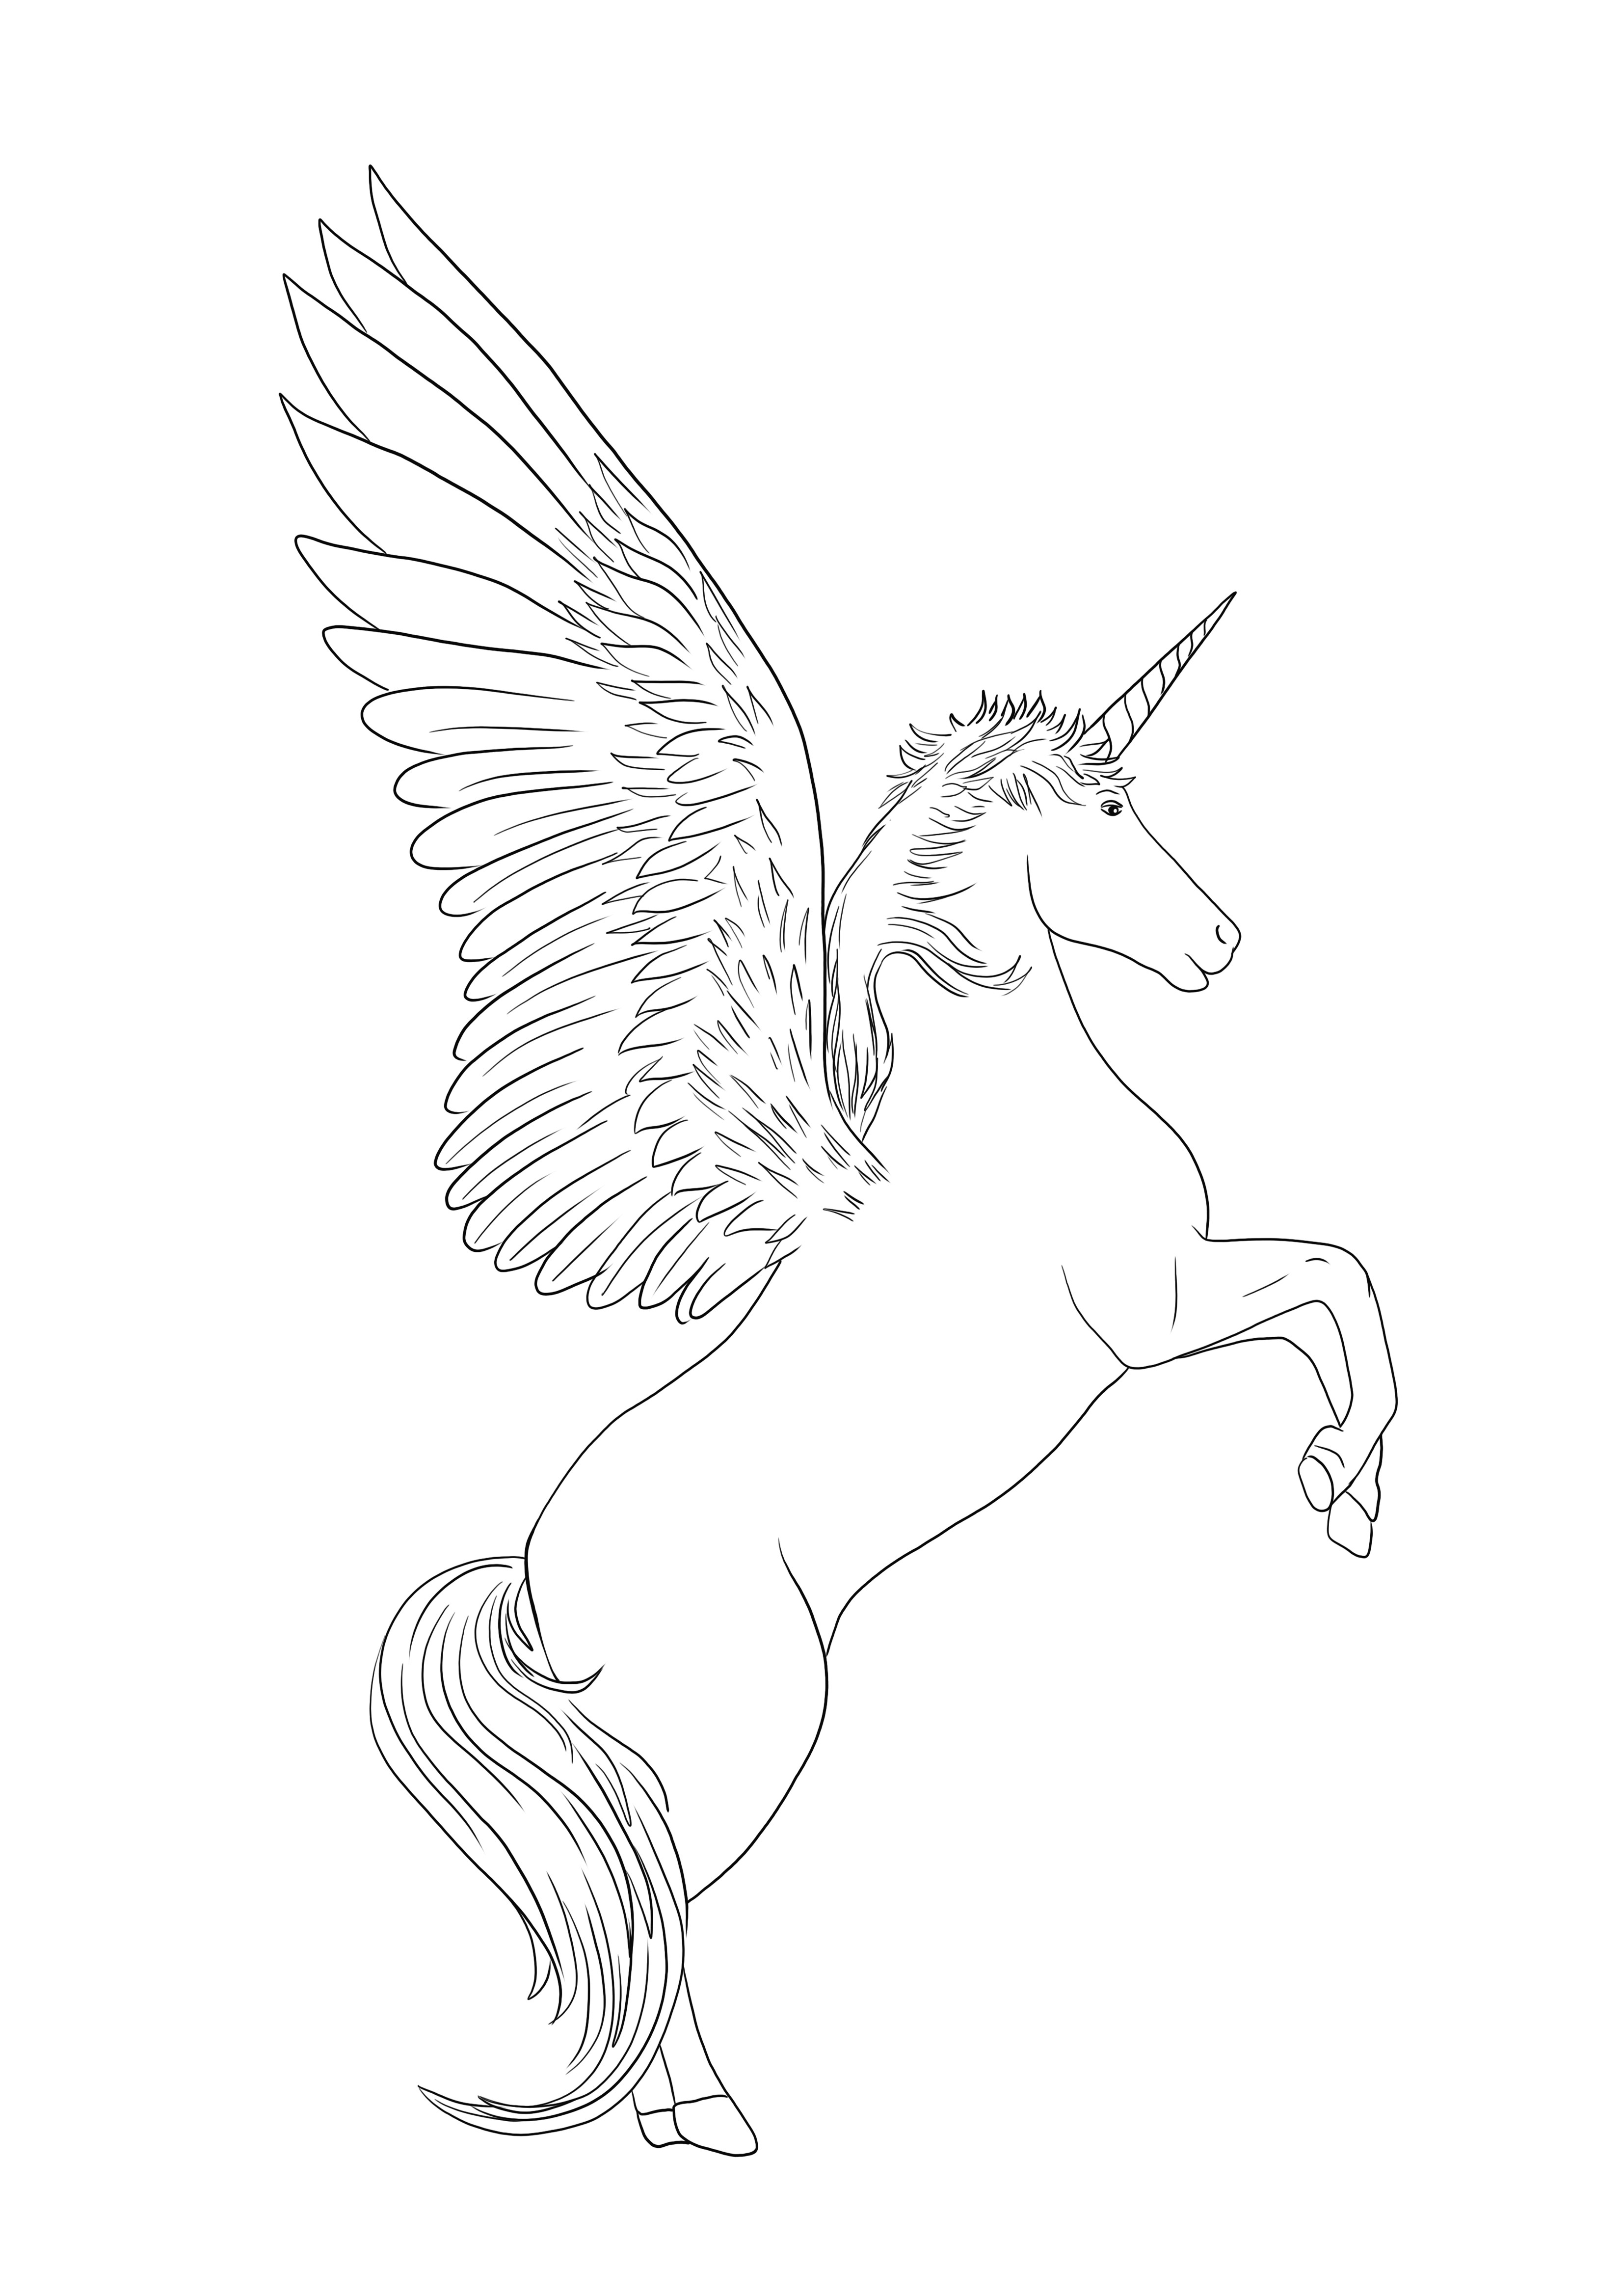 Unicorn with wings coloring and downloading free for kids